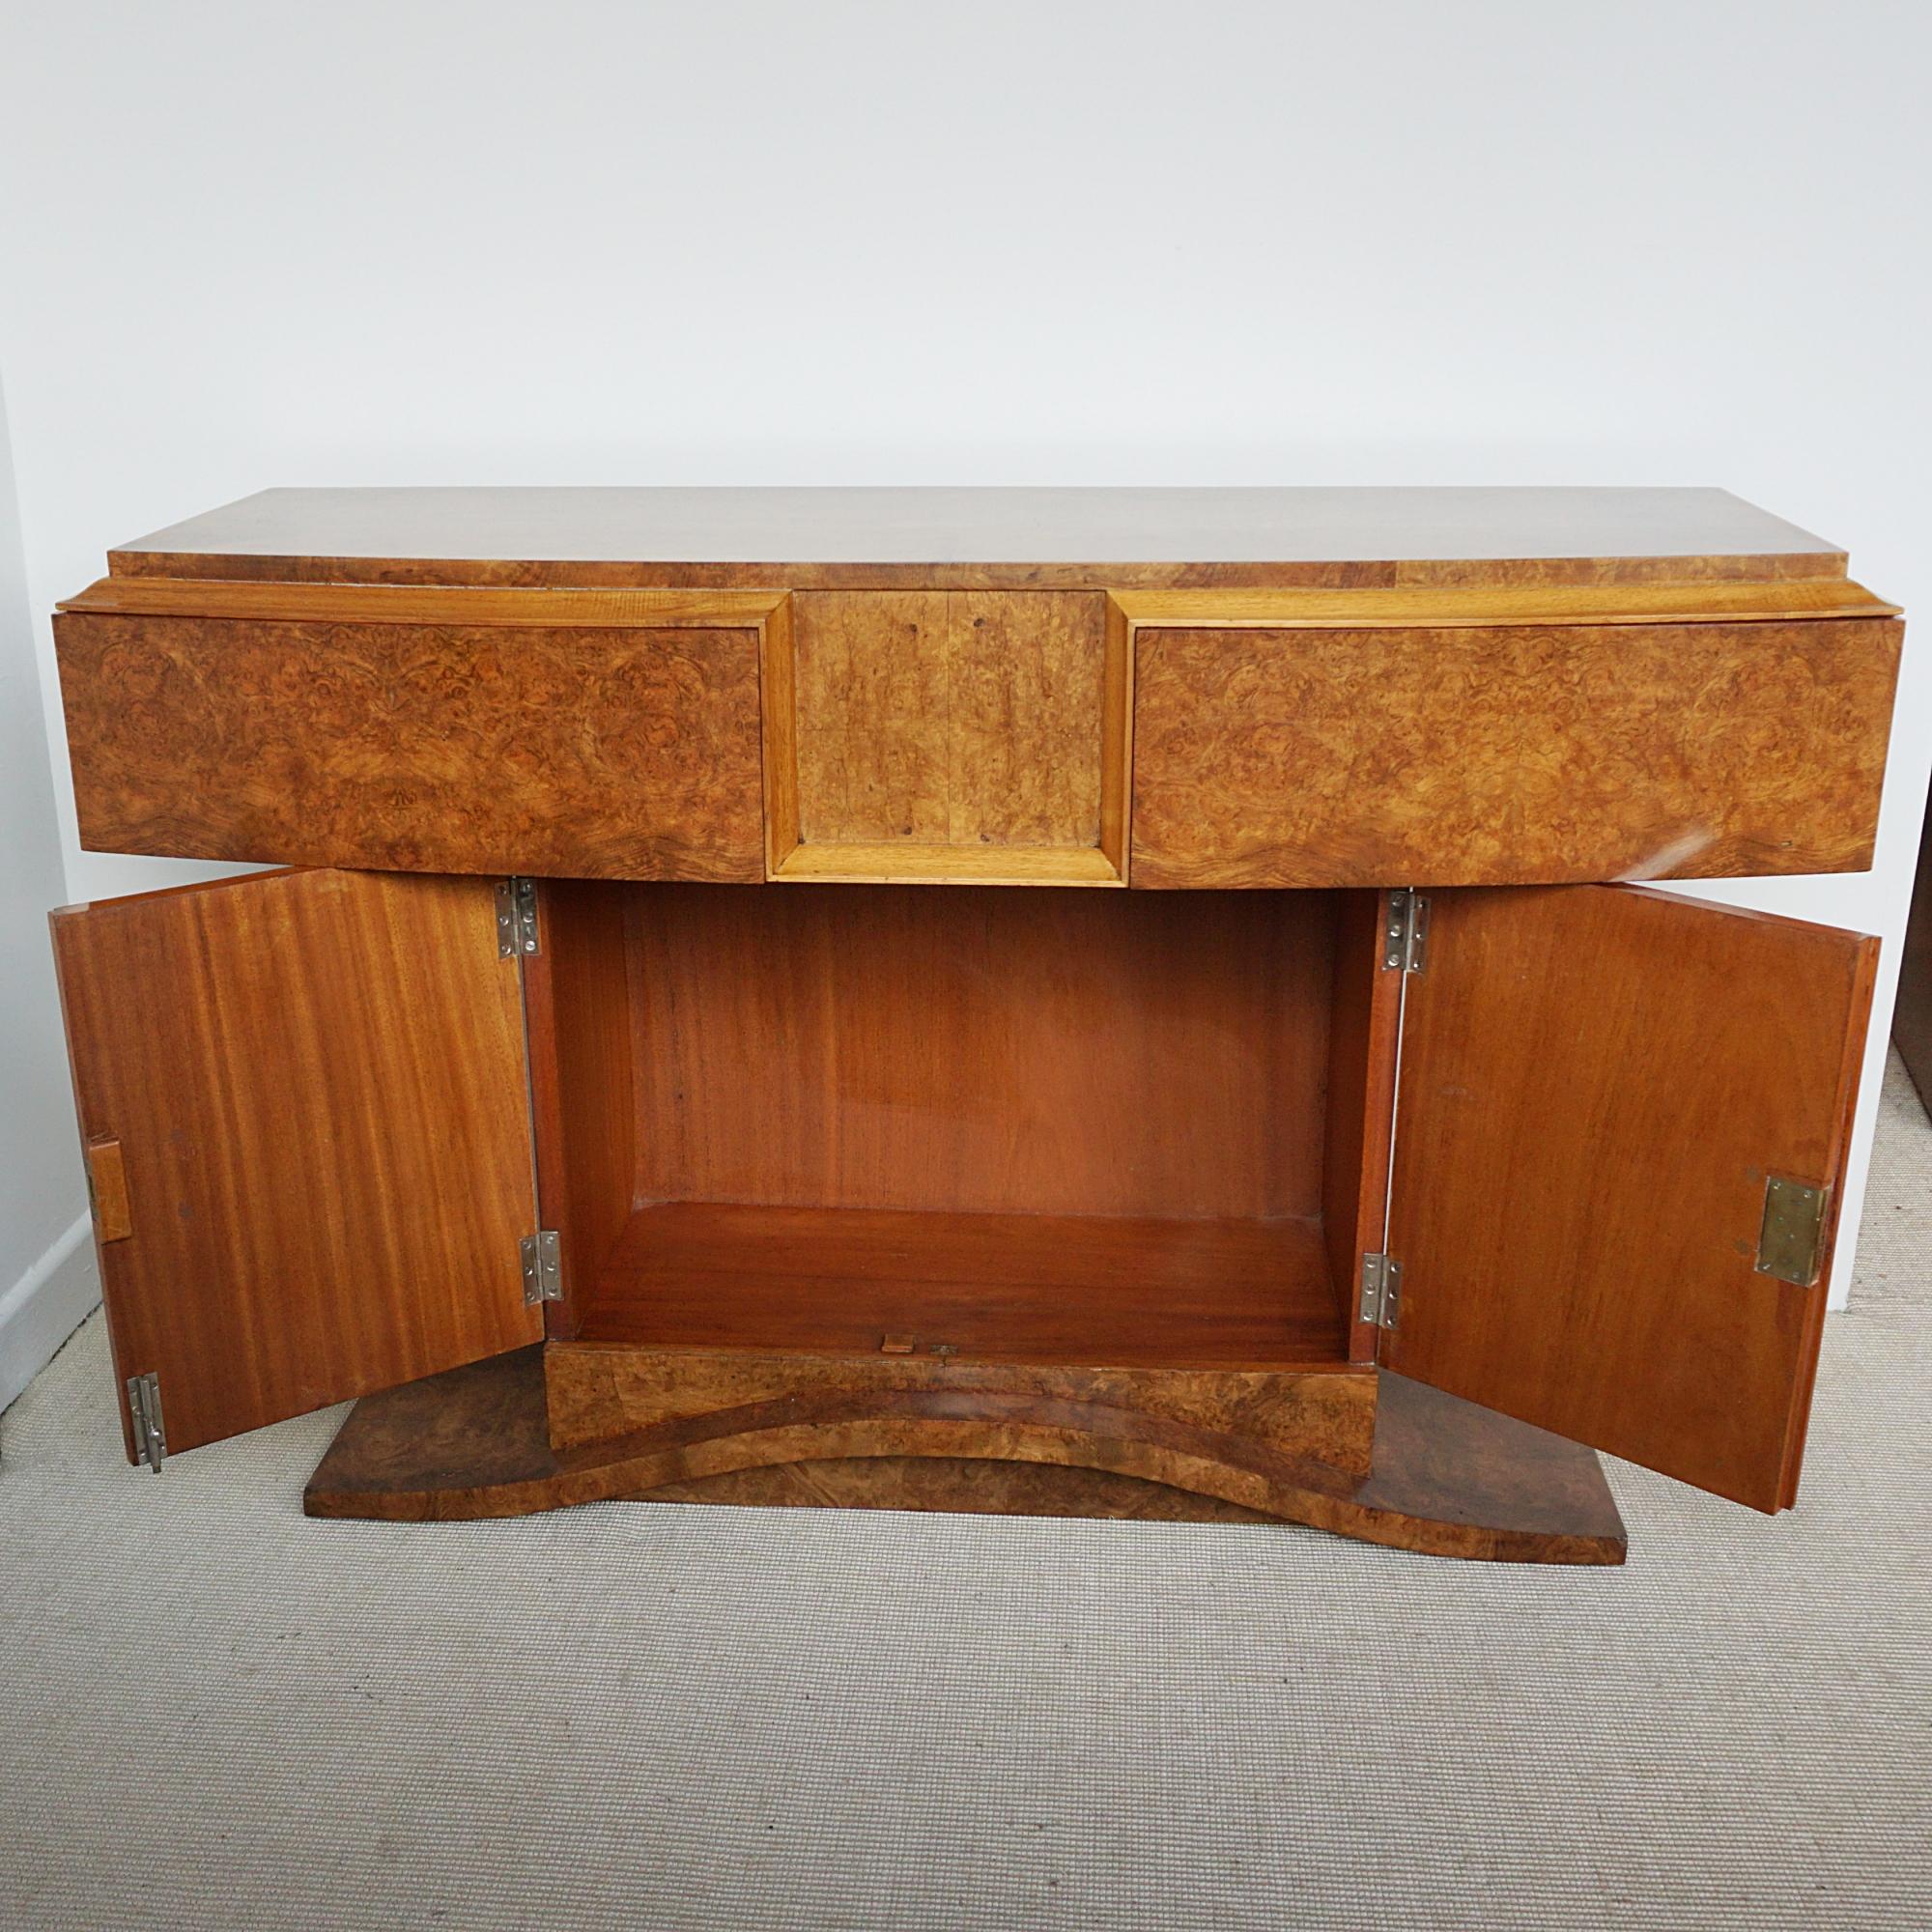 English Art Deco Burr Walnut Console Table by Hille of London